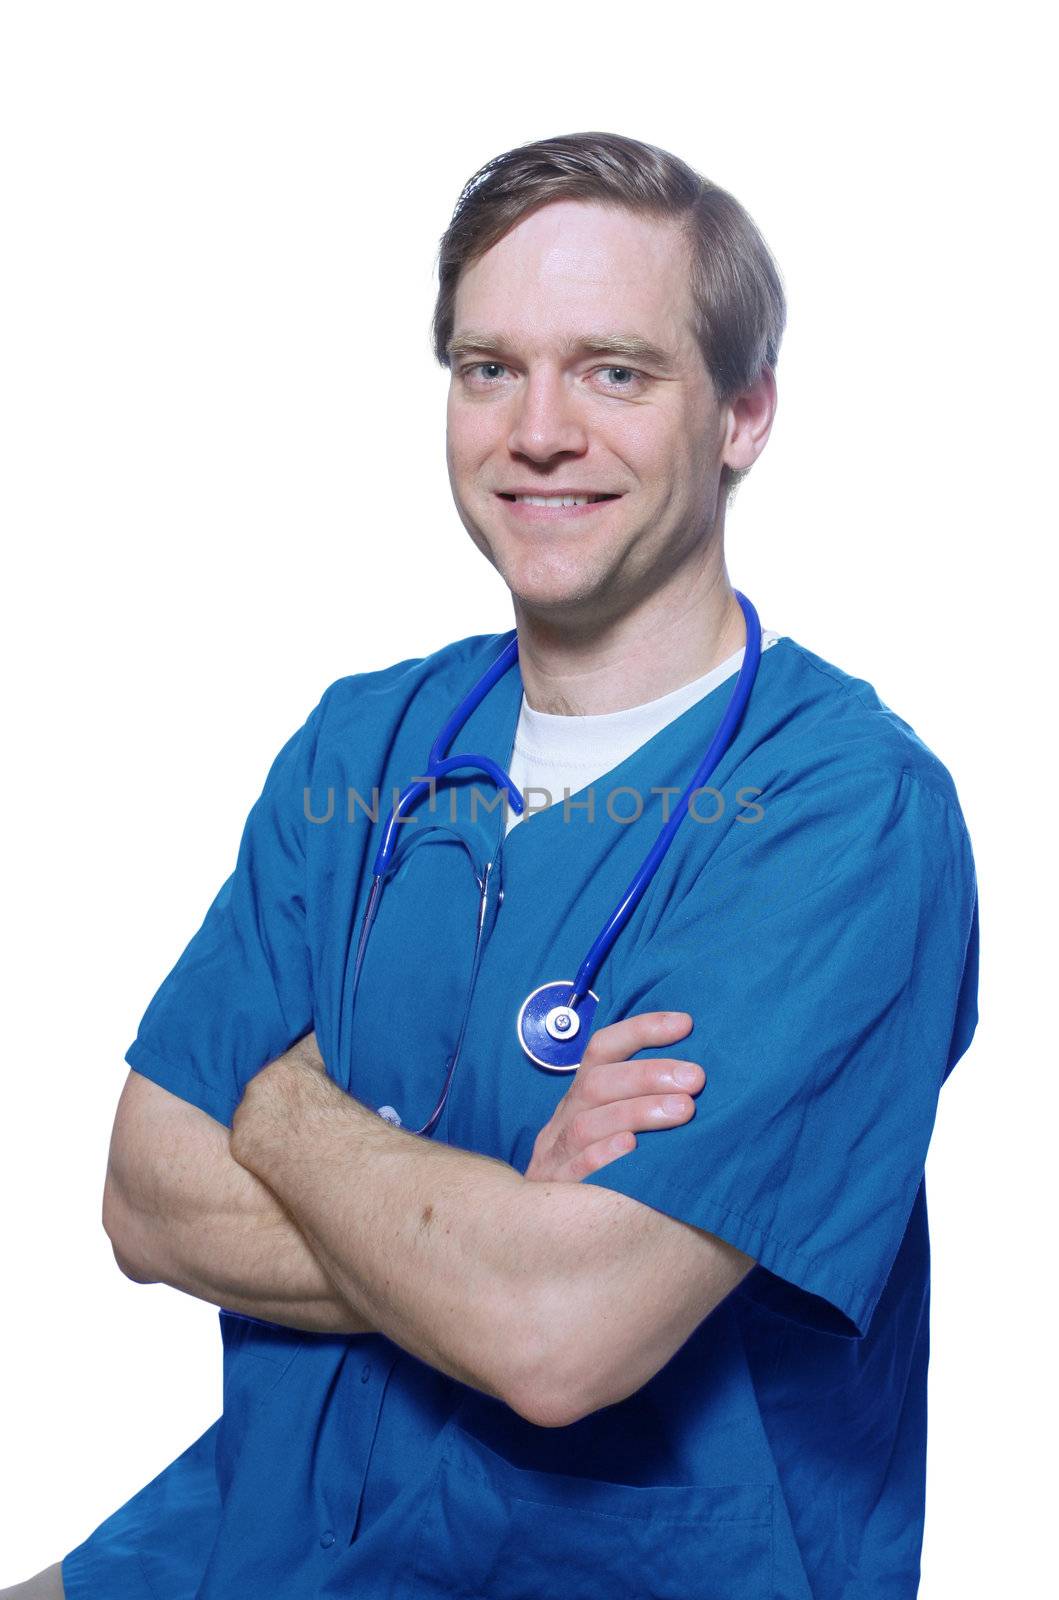 Handsome doctor smiling with arms crossed by jarenwicklund